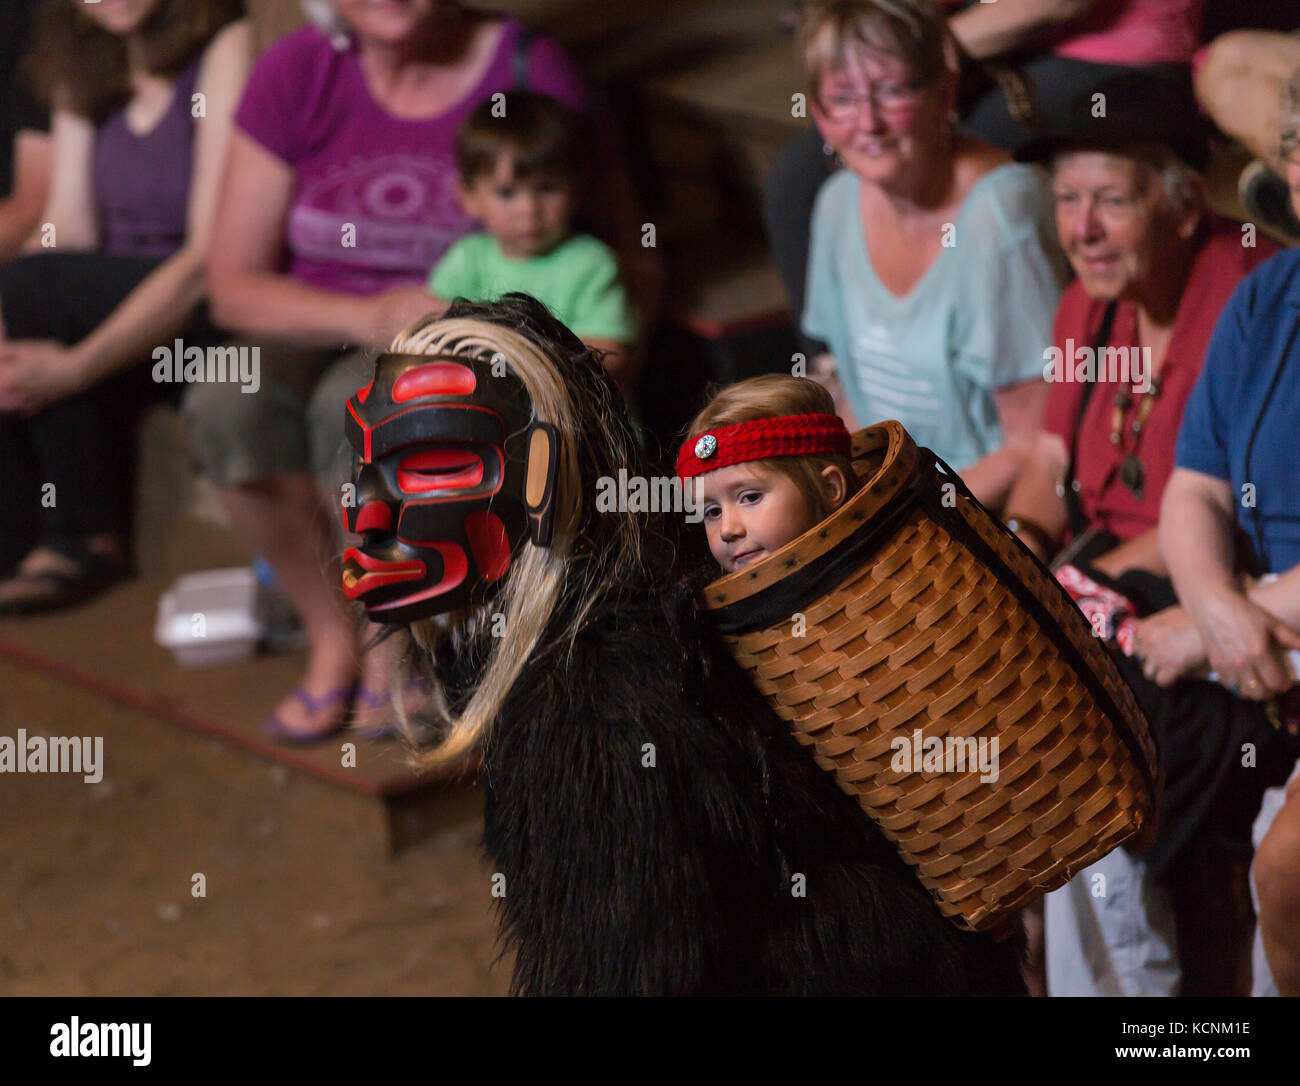 Dzunakwa, Wild woman of the woods and the keeper of children in first nation lore dances for visitors to the Komok's bighouse, Comox, Vancouver Island, British Columbia, Canada. Stock Photo